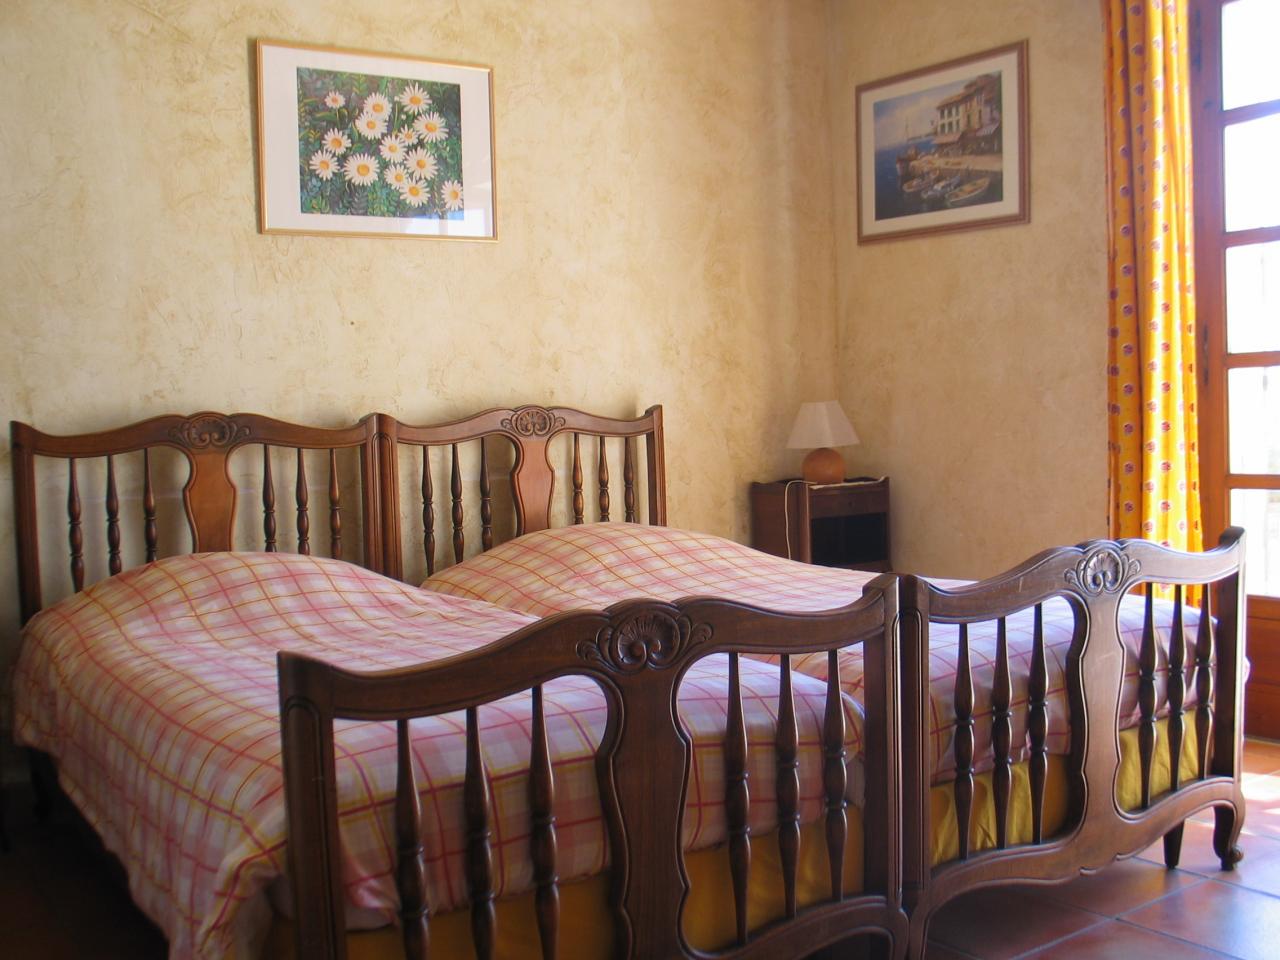 The south-bedroom